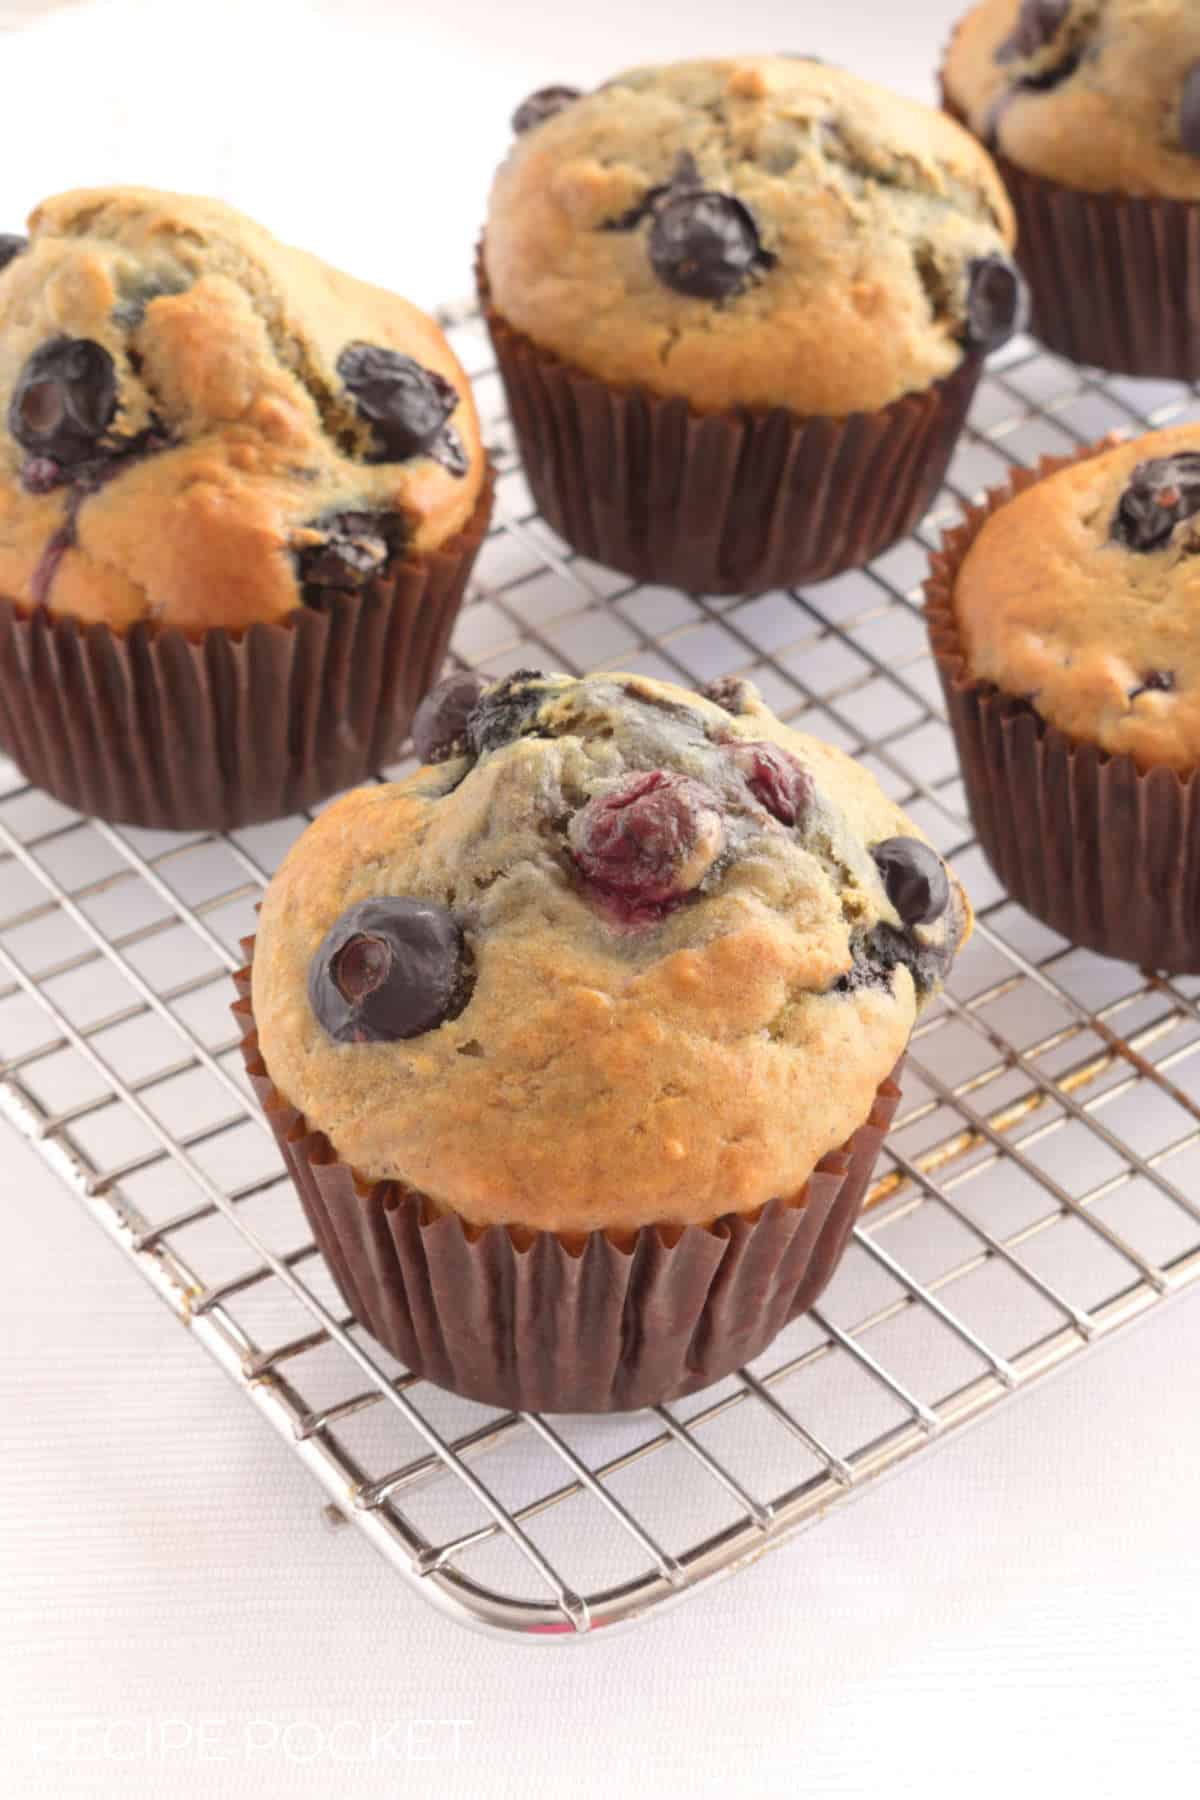 Muffins in brown wrappers on a cake rack.